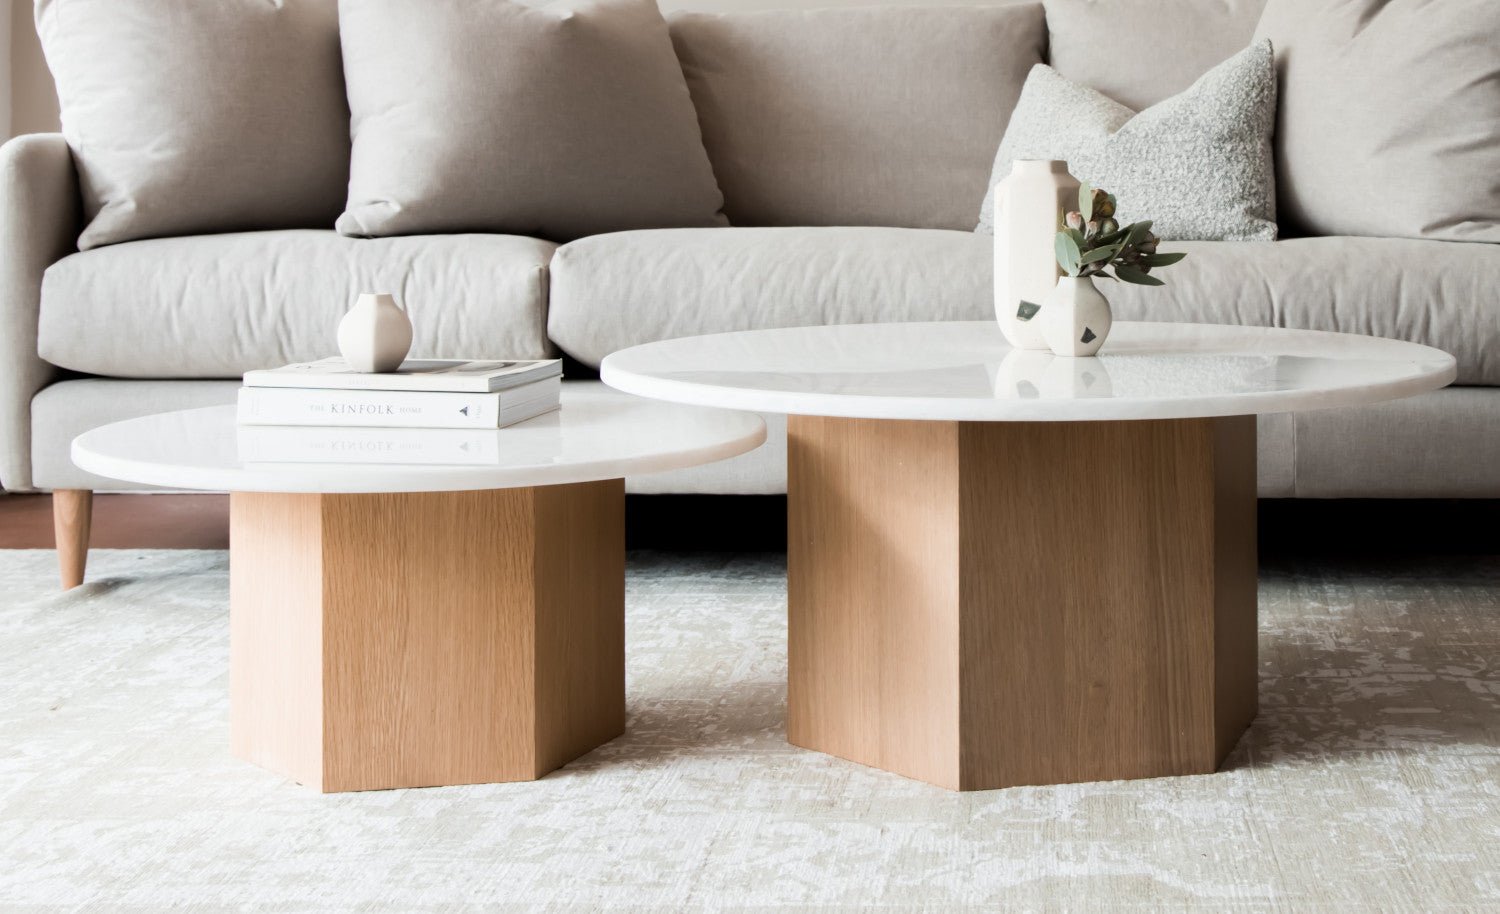 12 Modern Coffee Tables That Are Sure to Impress Your Guests